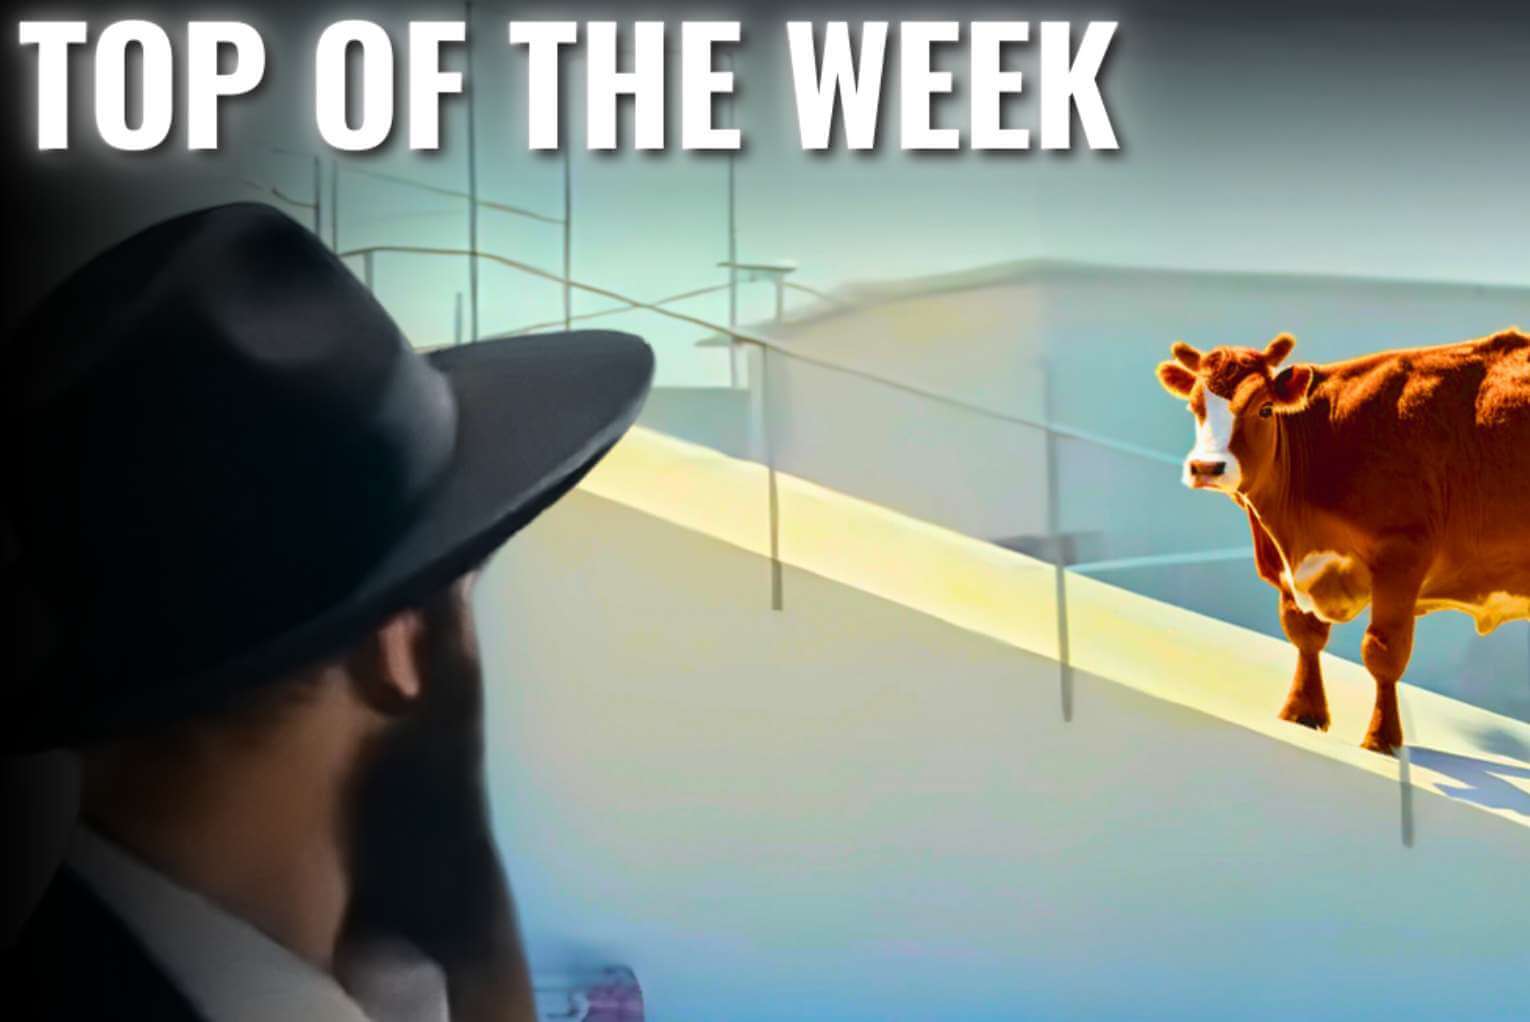 Top of the Week: ‘Massive Altar’ for Red Heifer Sacrifice Constructed in Israel